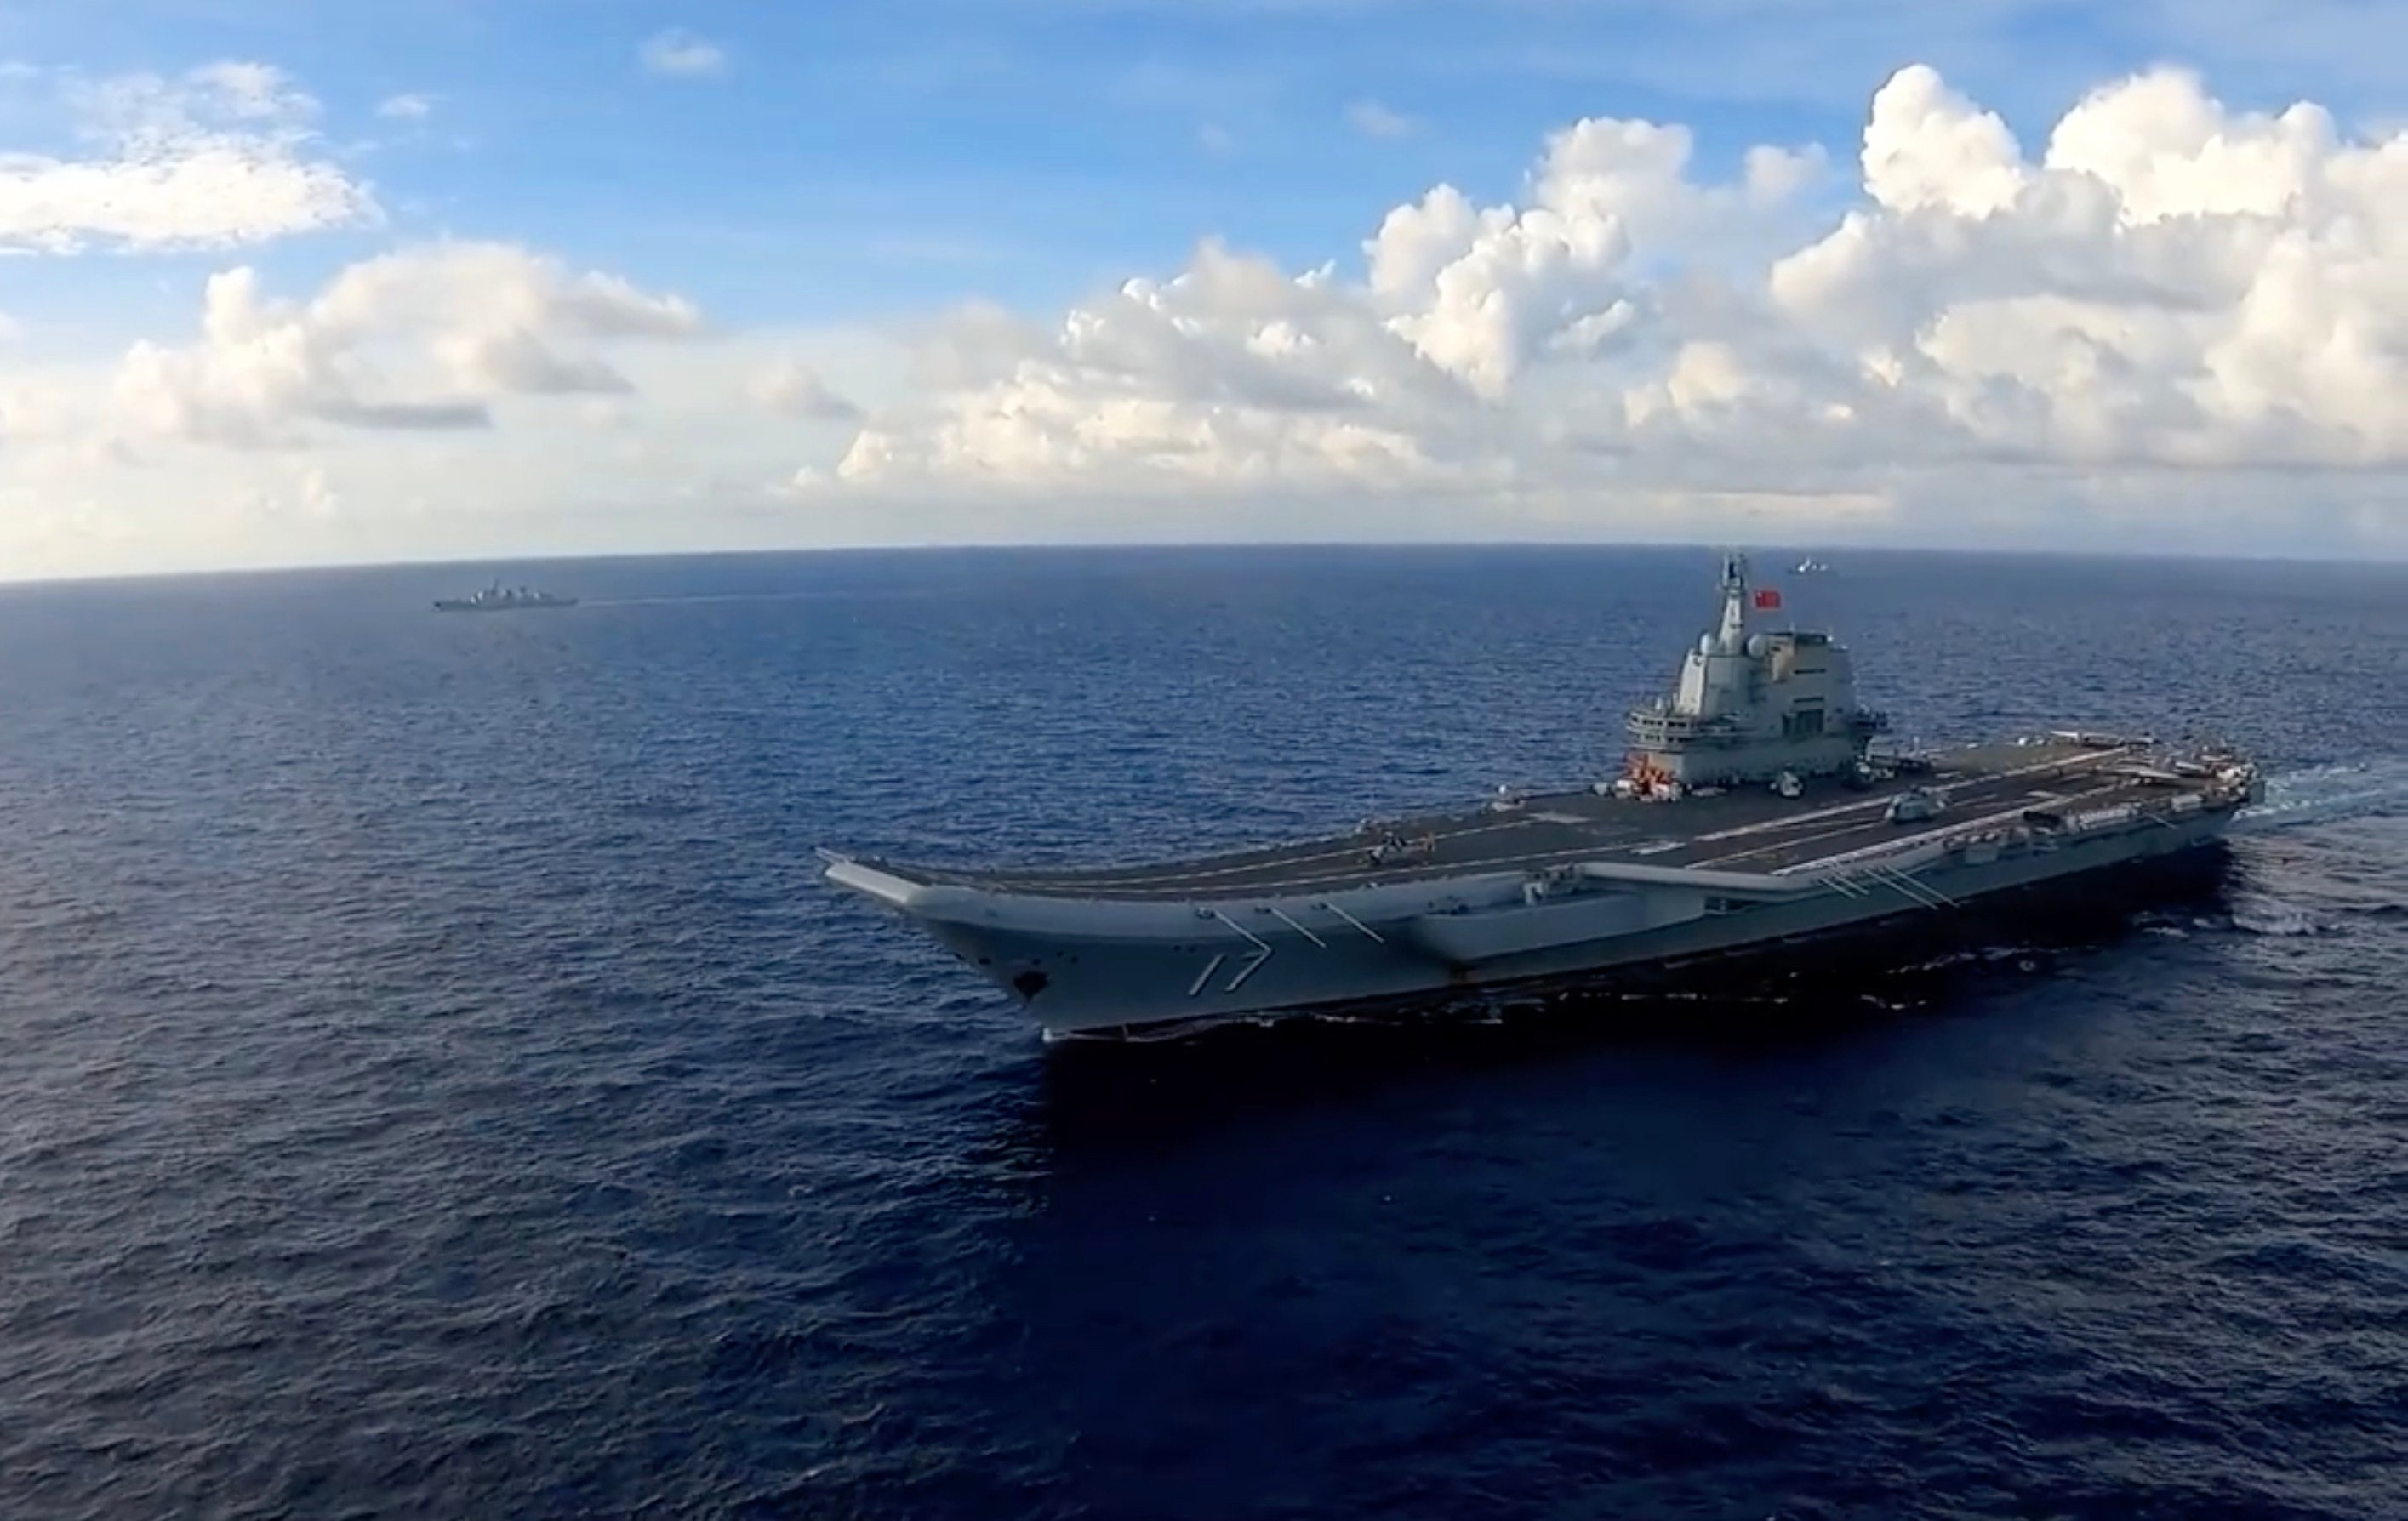 The Chinese aircraft carrier Shandong and its battle group during training exercises in the South China Sea in August. Photo: CCTV